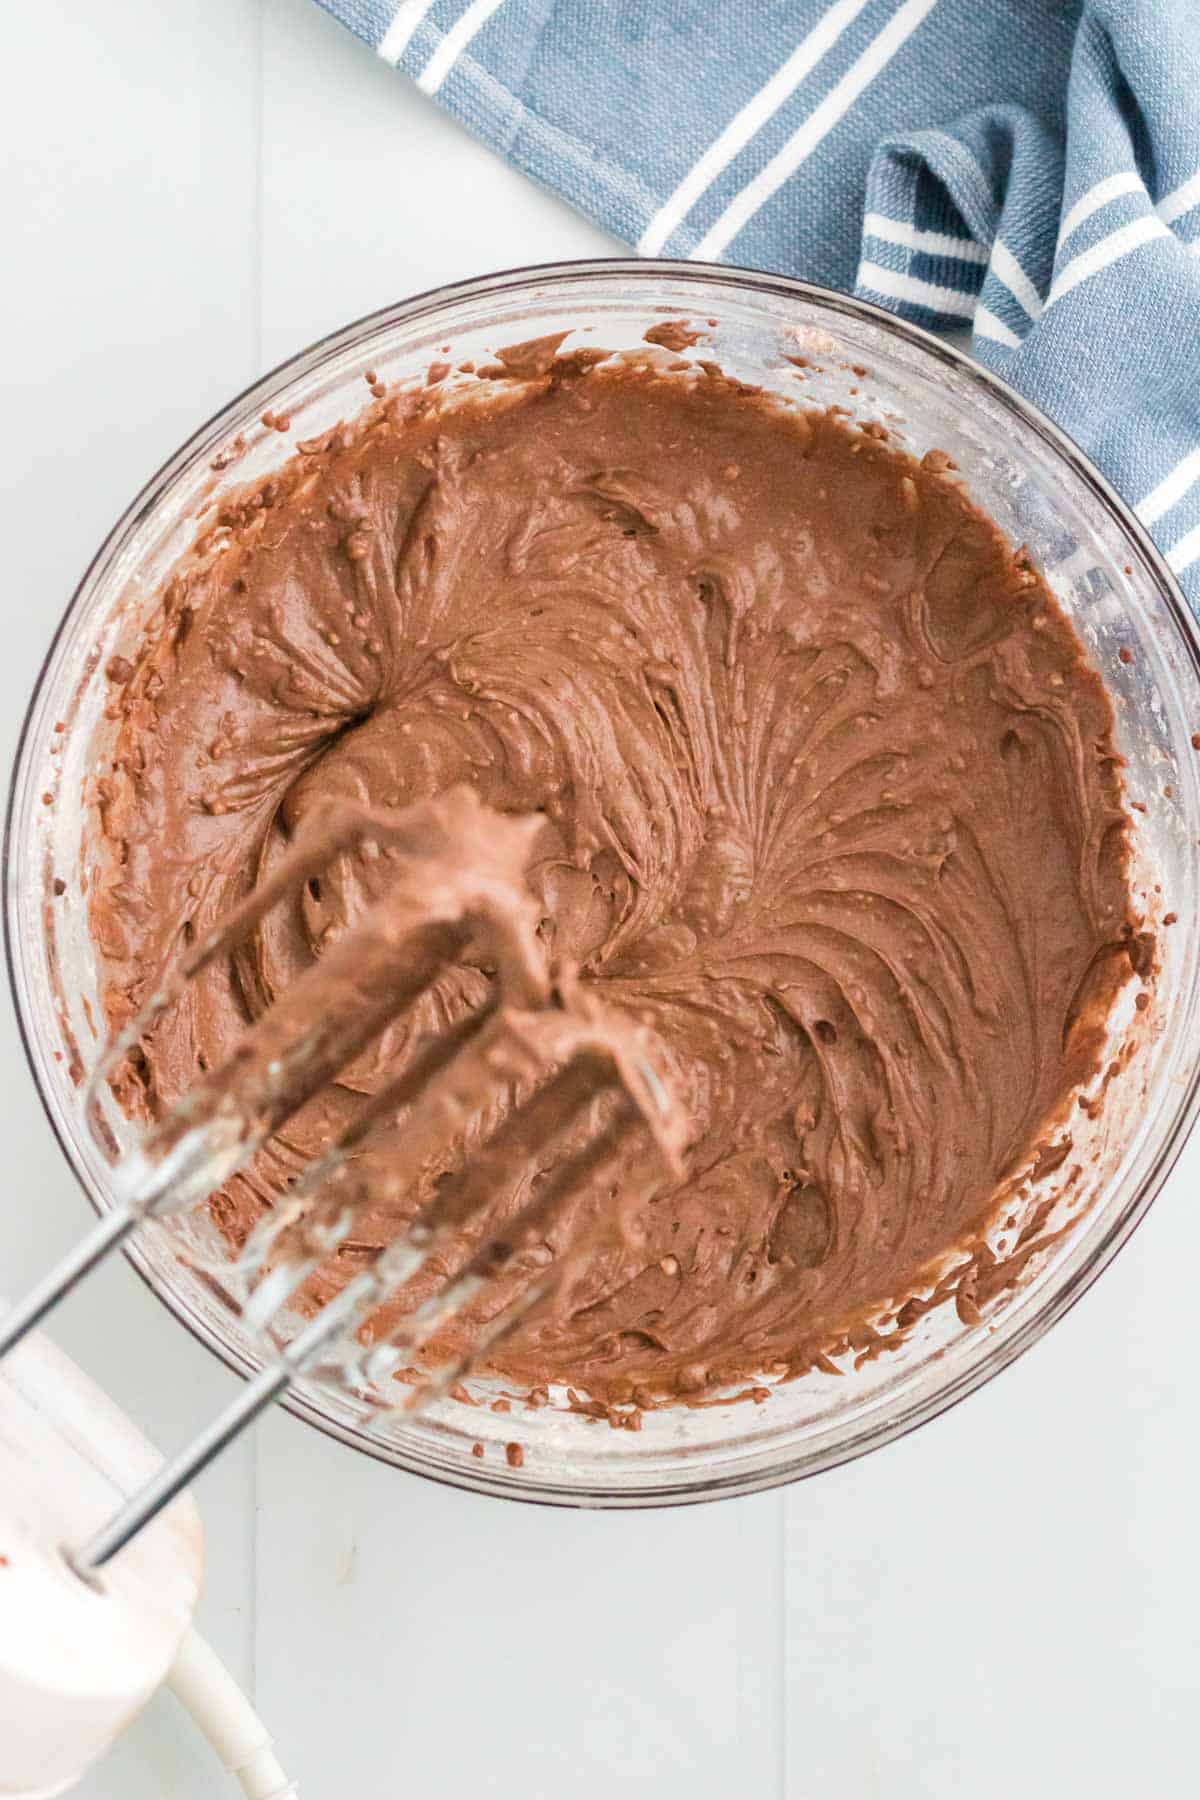 Beaters of a hand mixer of a bowl of the chocolate frosting.